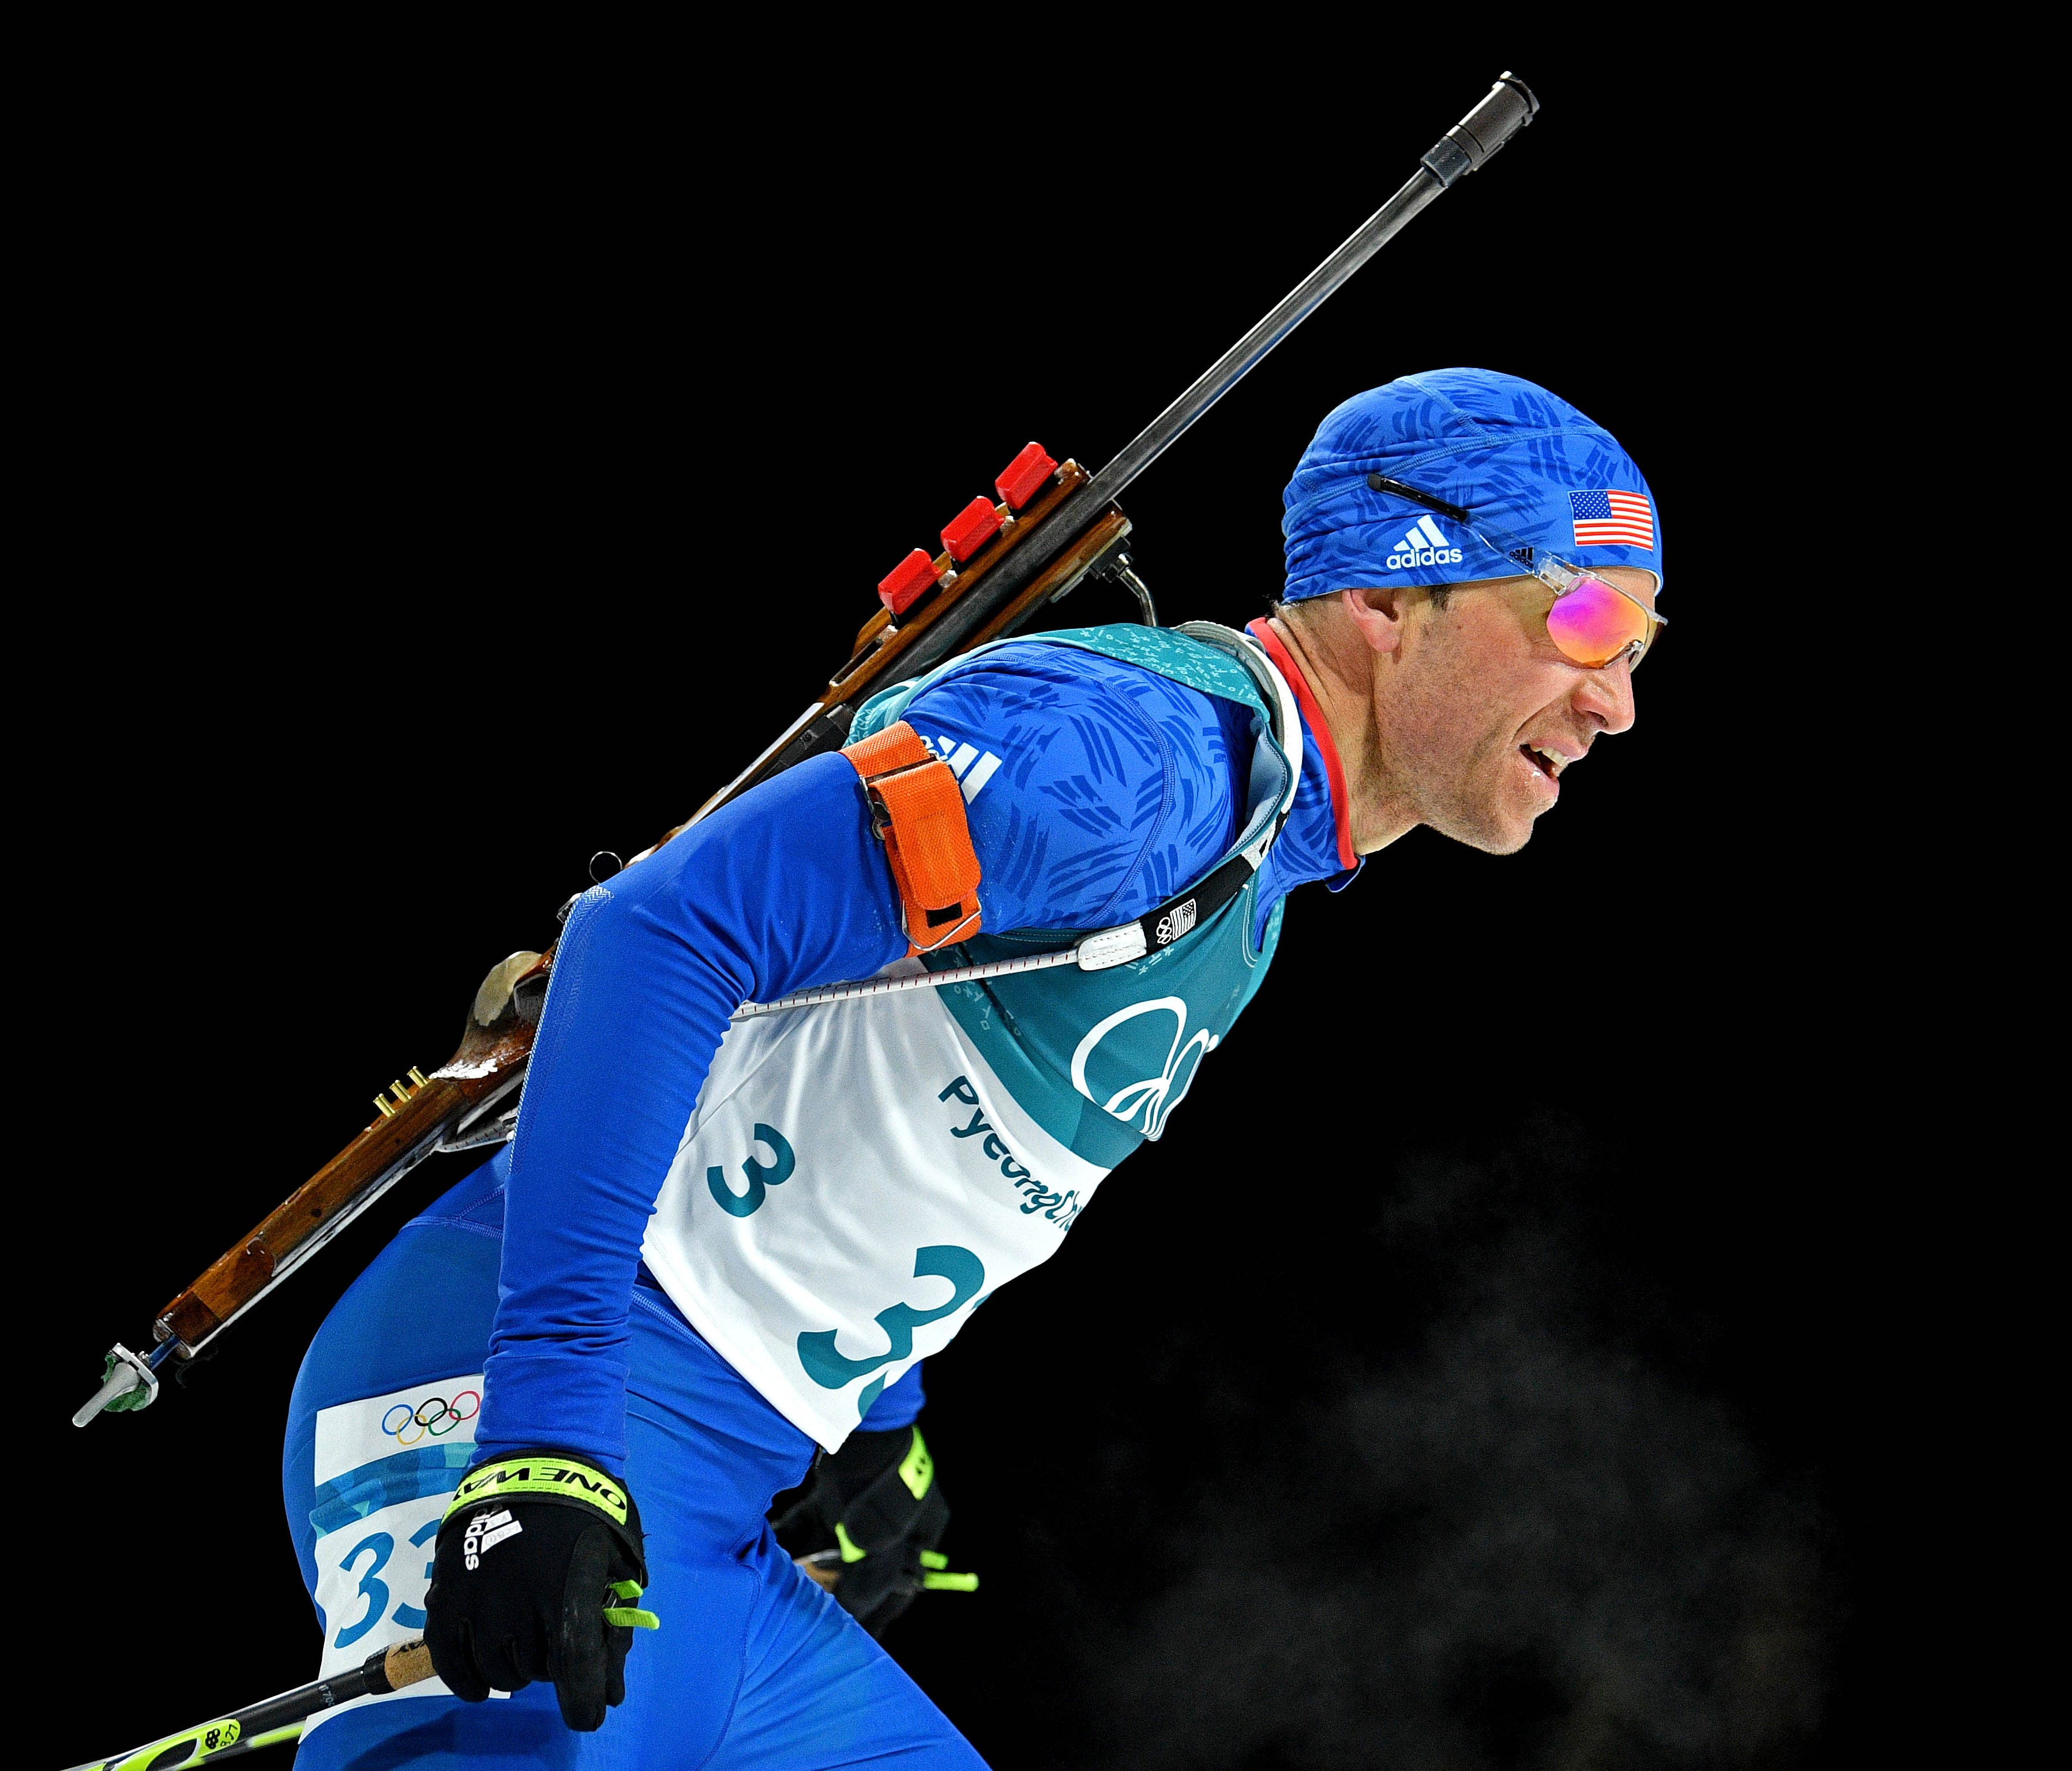 Lowell Bailey competes in the men's biathlon 12.5km pursuit during the Pyeongchang 2018 Olympic Winter Games.